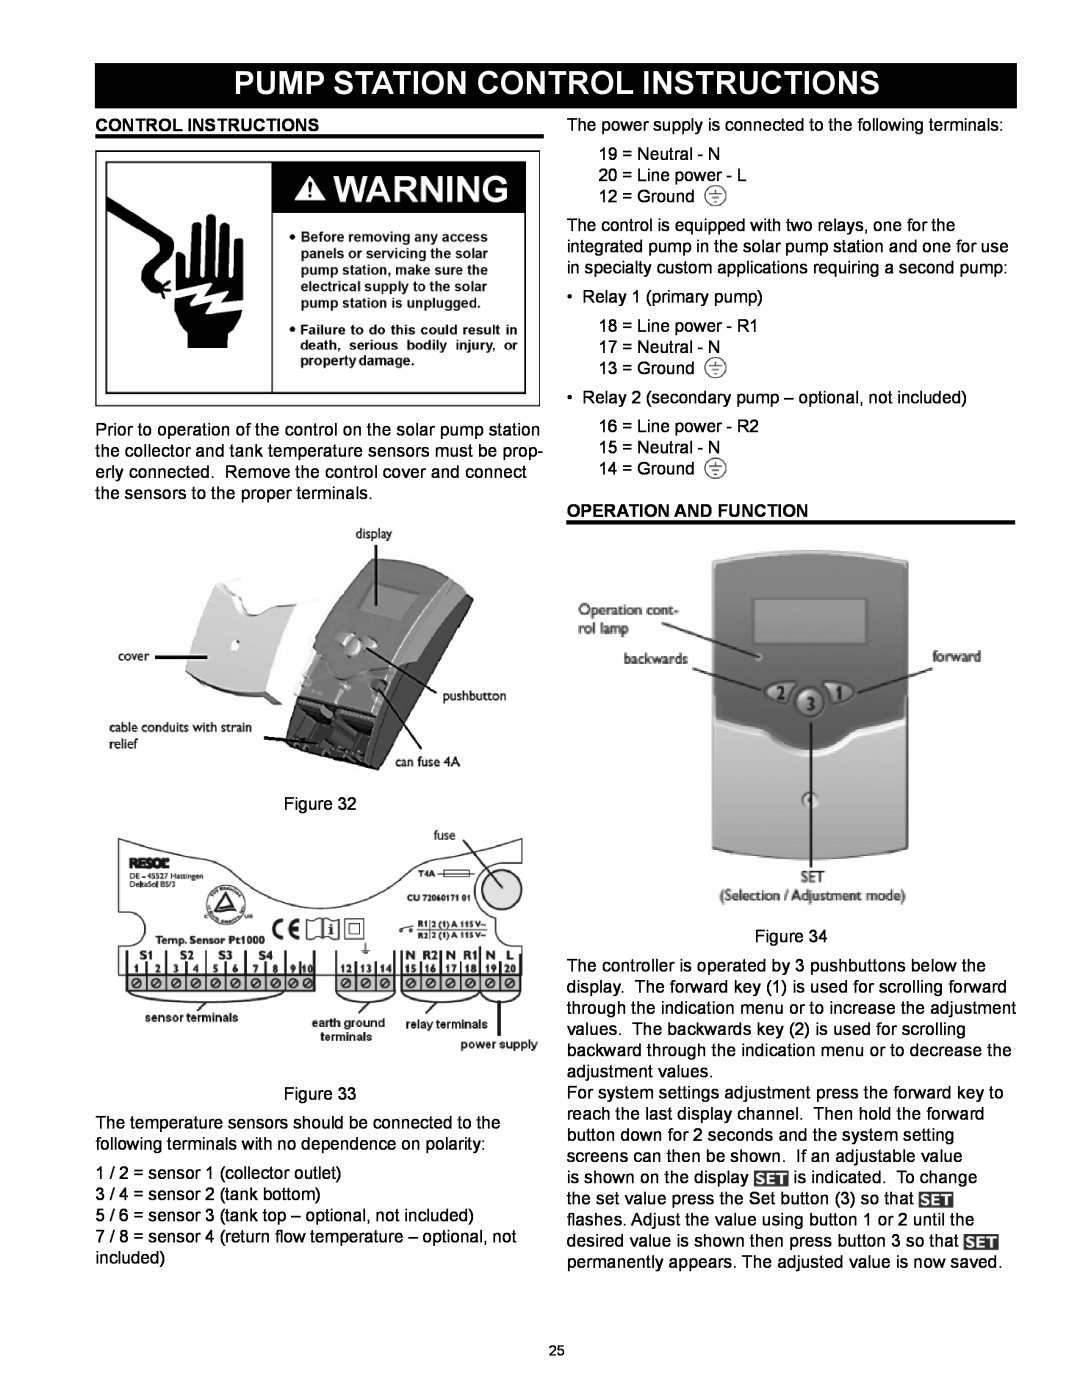 American Water Heater 318281-000 instruction manual Pump Station Control Instructions, Operation And Function 